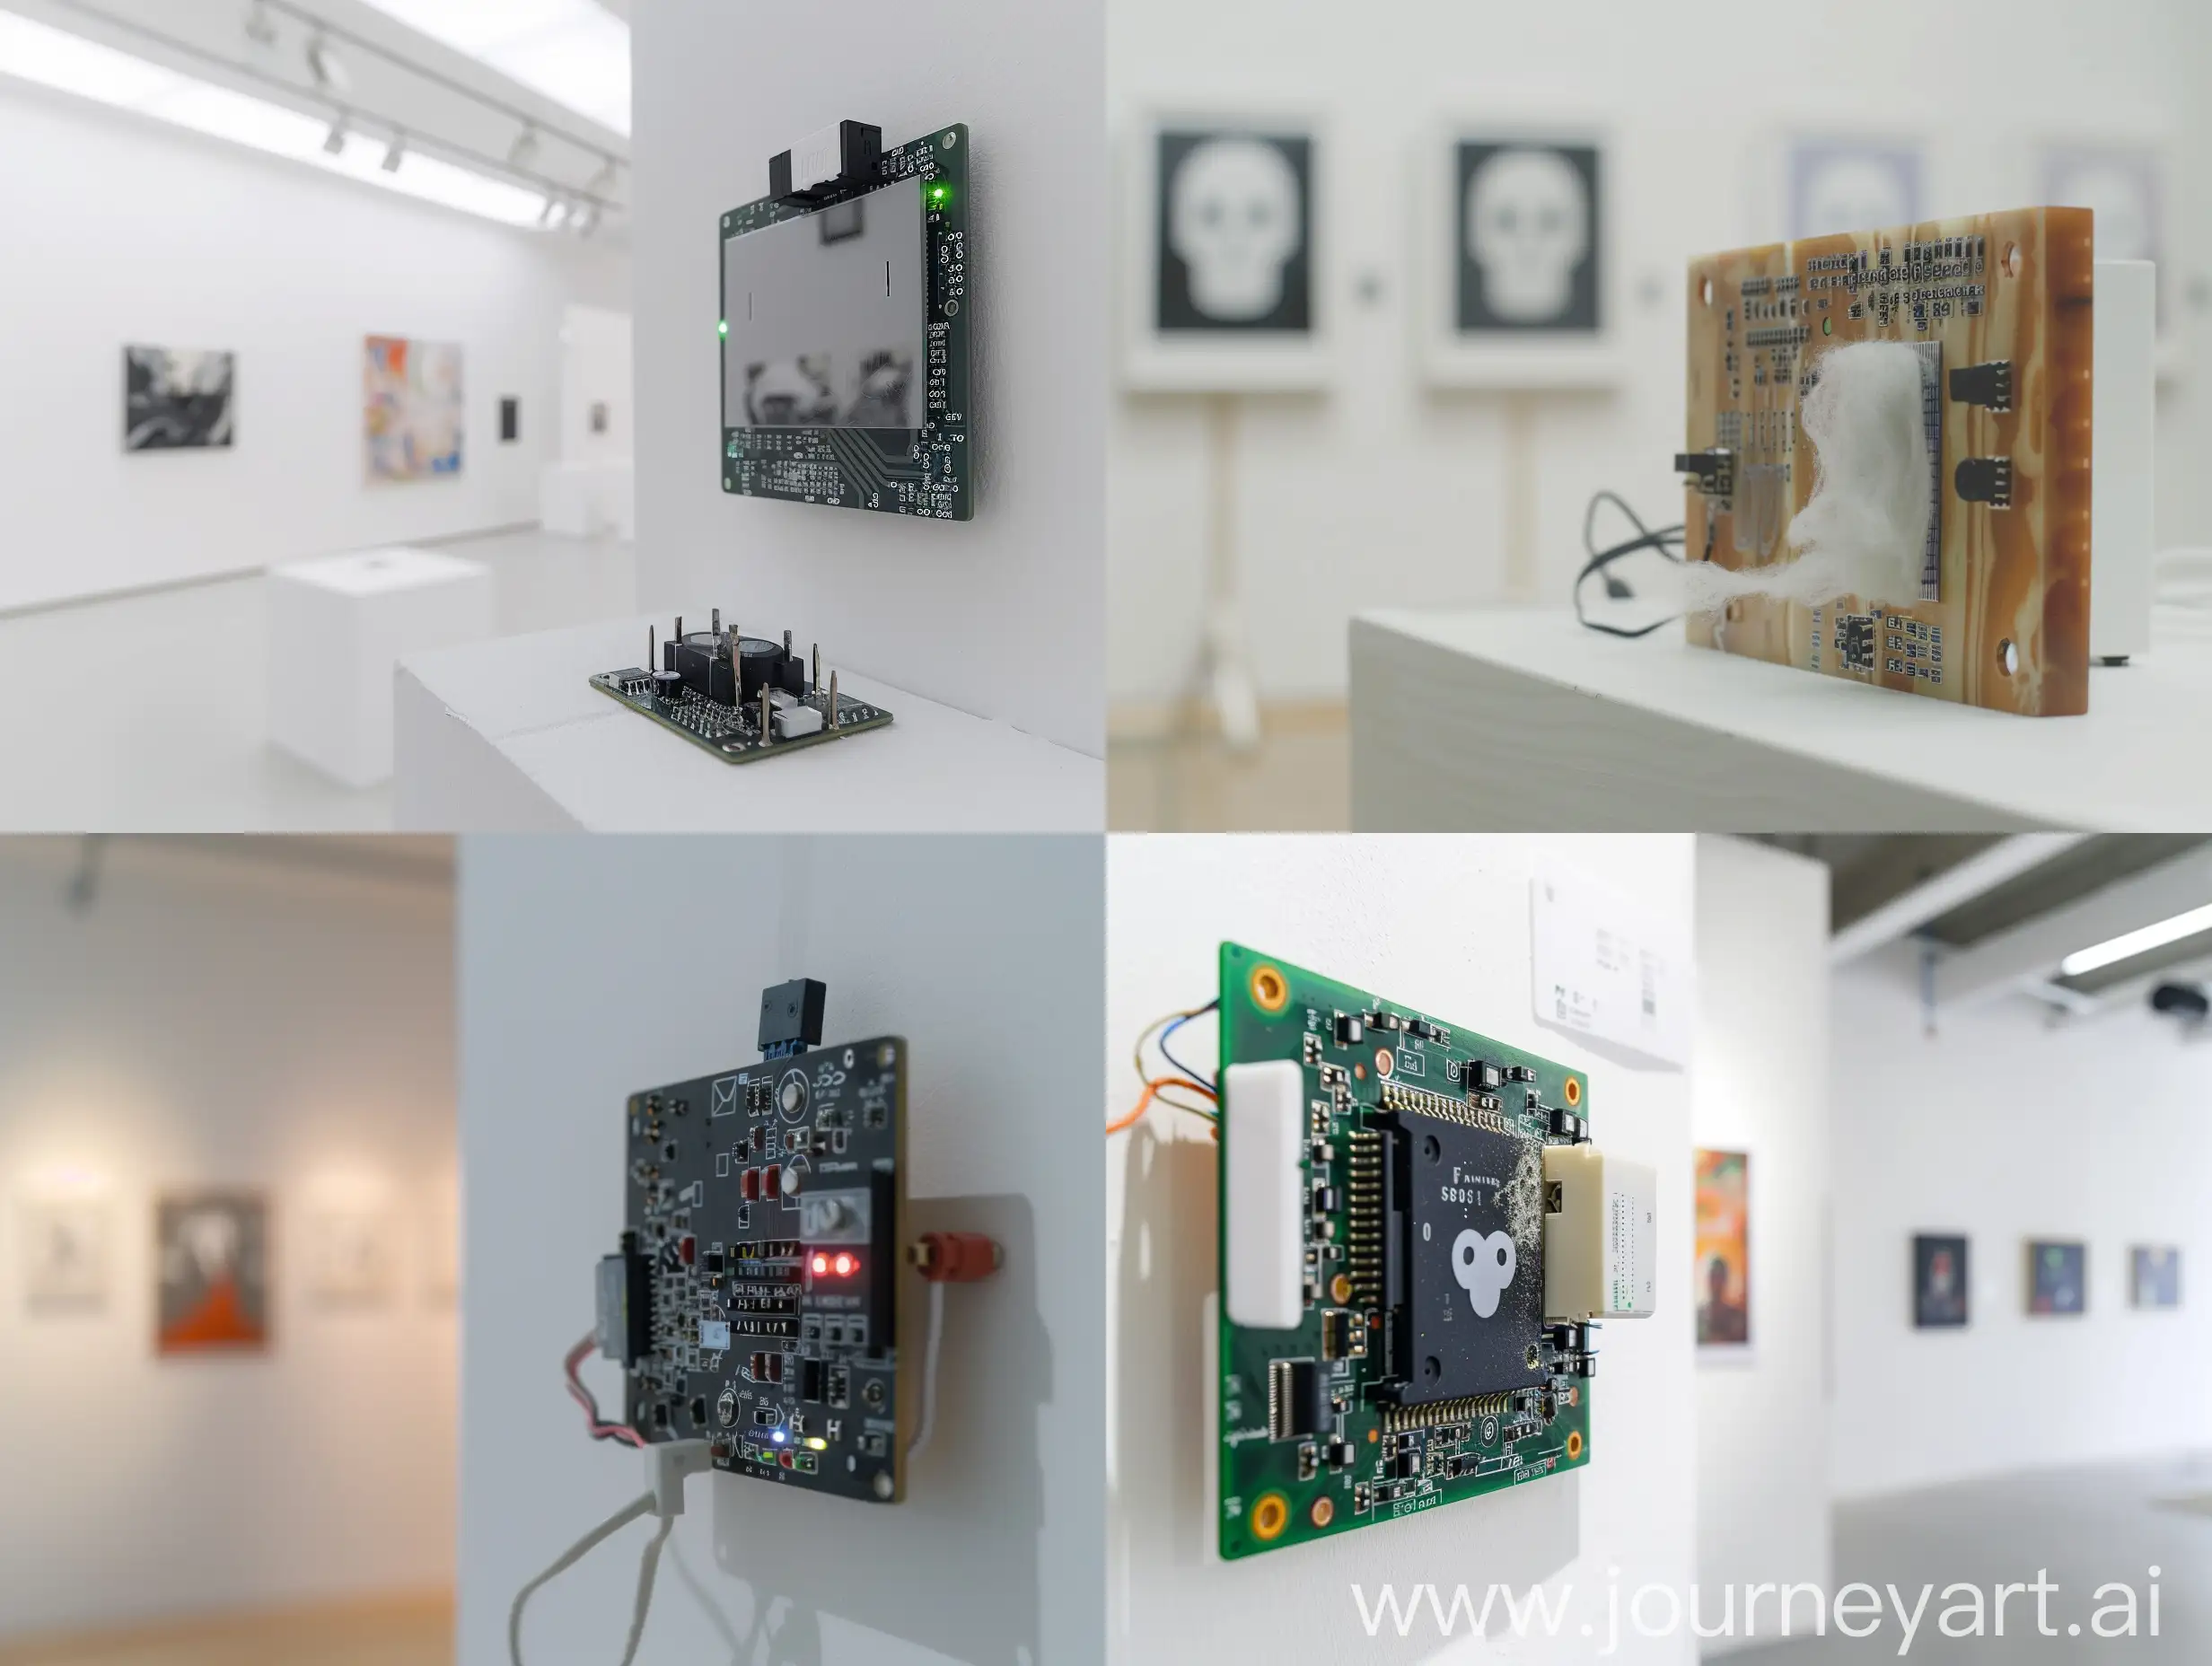 arduino board with sensors detecting the presence of ghosts and other hauntings generating random numbers contemporary art gallery white walls design architect product